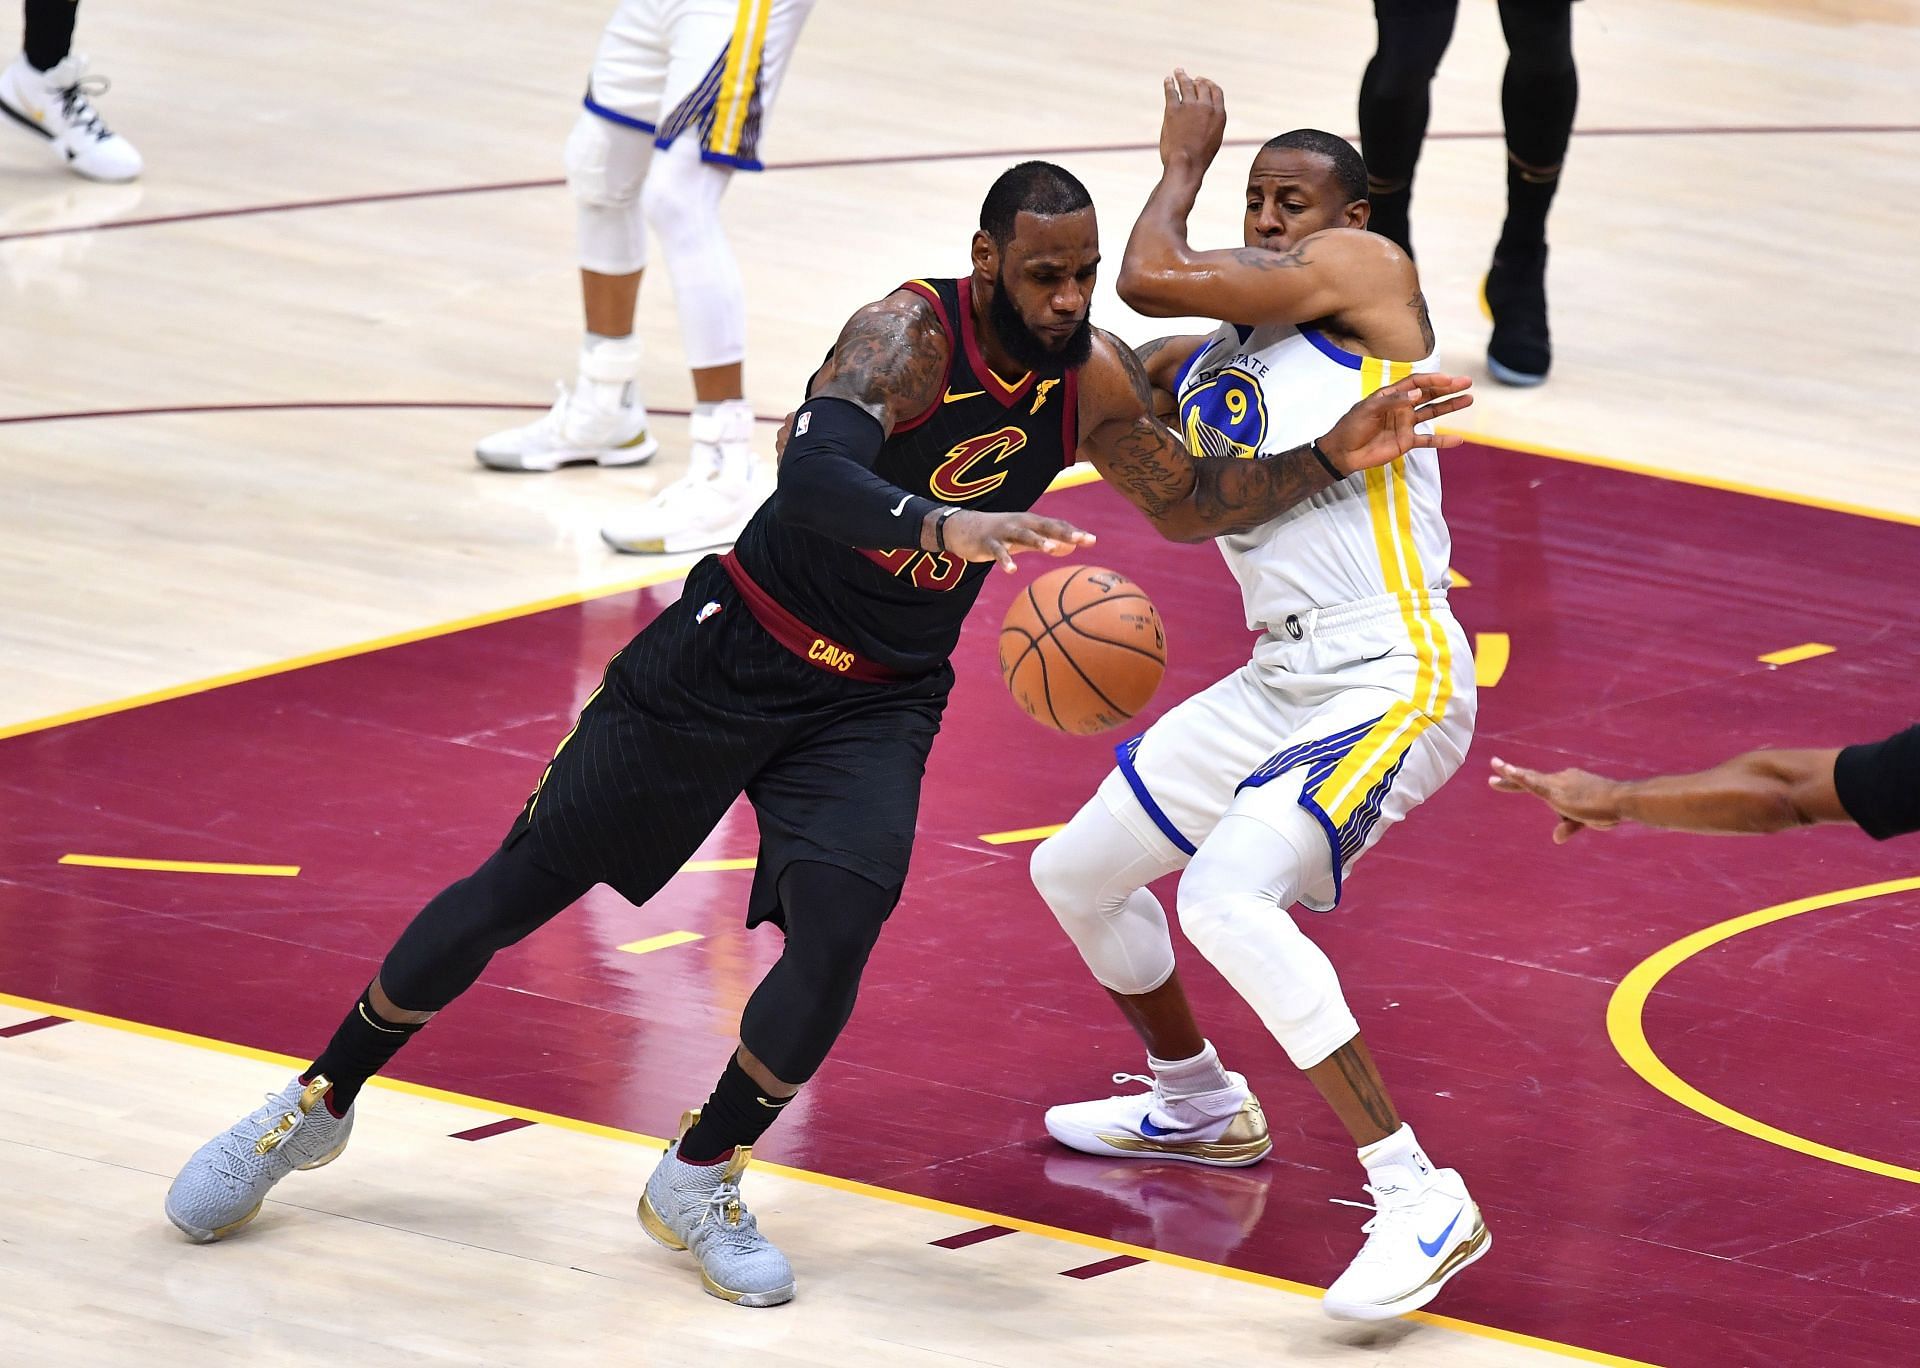 LeBron James #23 of the Cleveland Cavaliers drives to the basket defended by Andre Iguodala #9 of the Golden State Warriors in Game 3 of the 2018 NBA Finals.